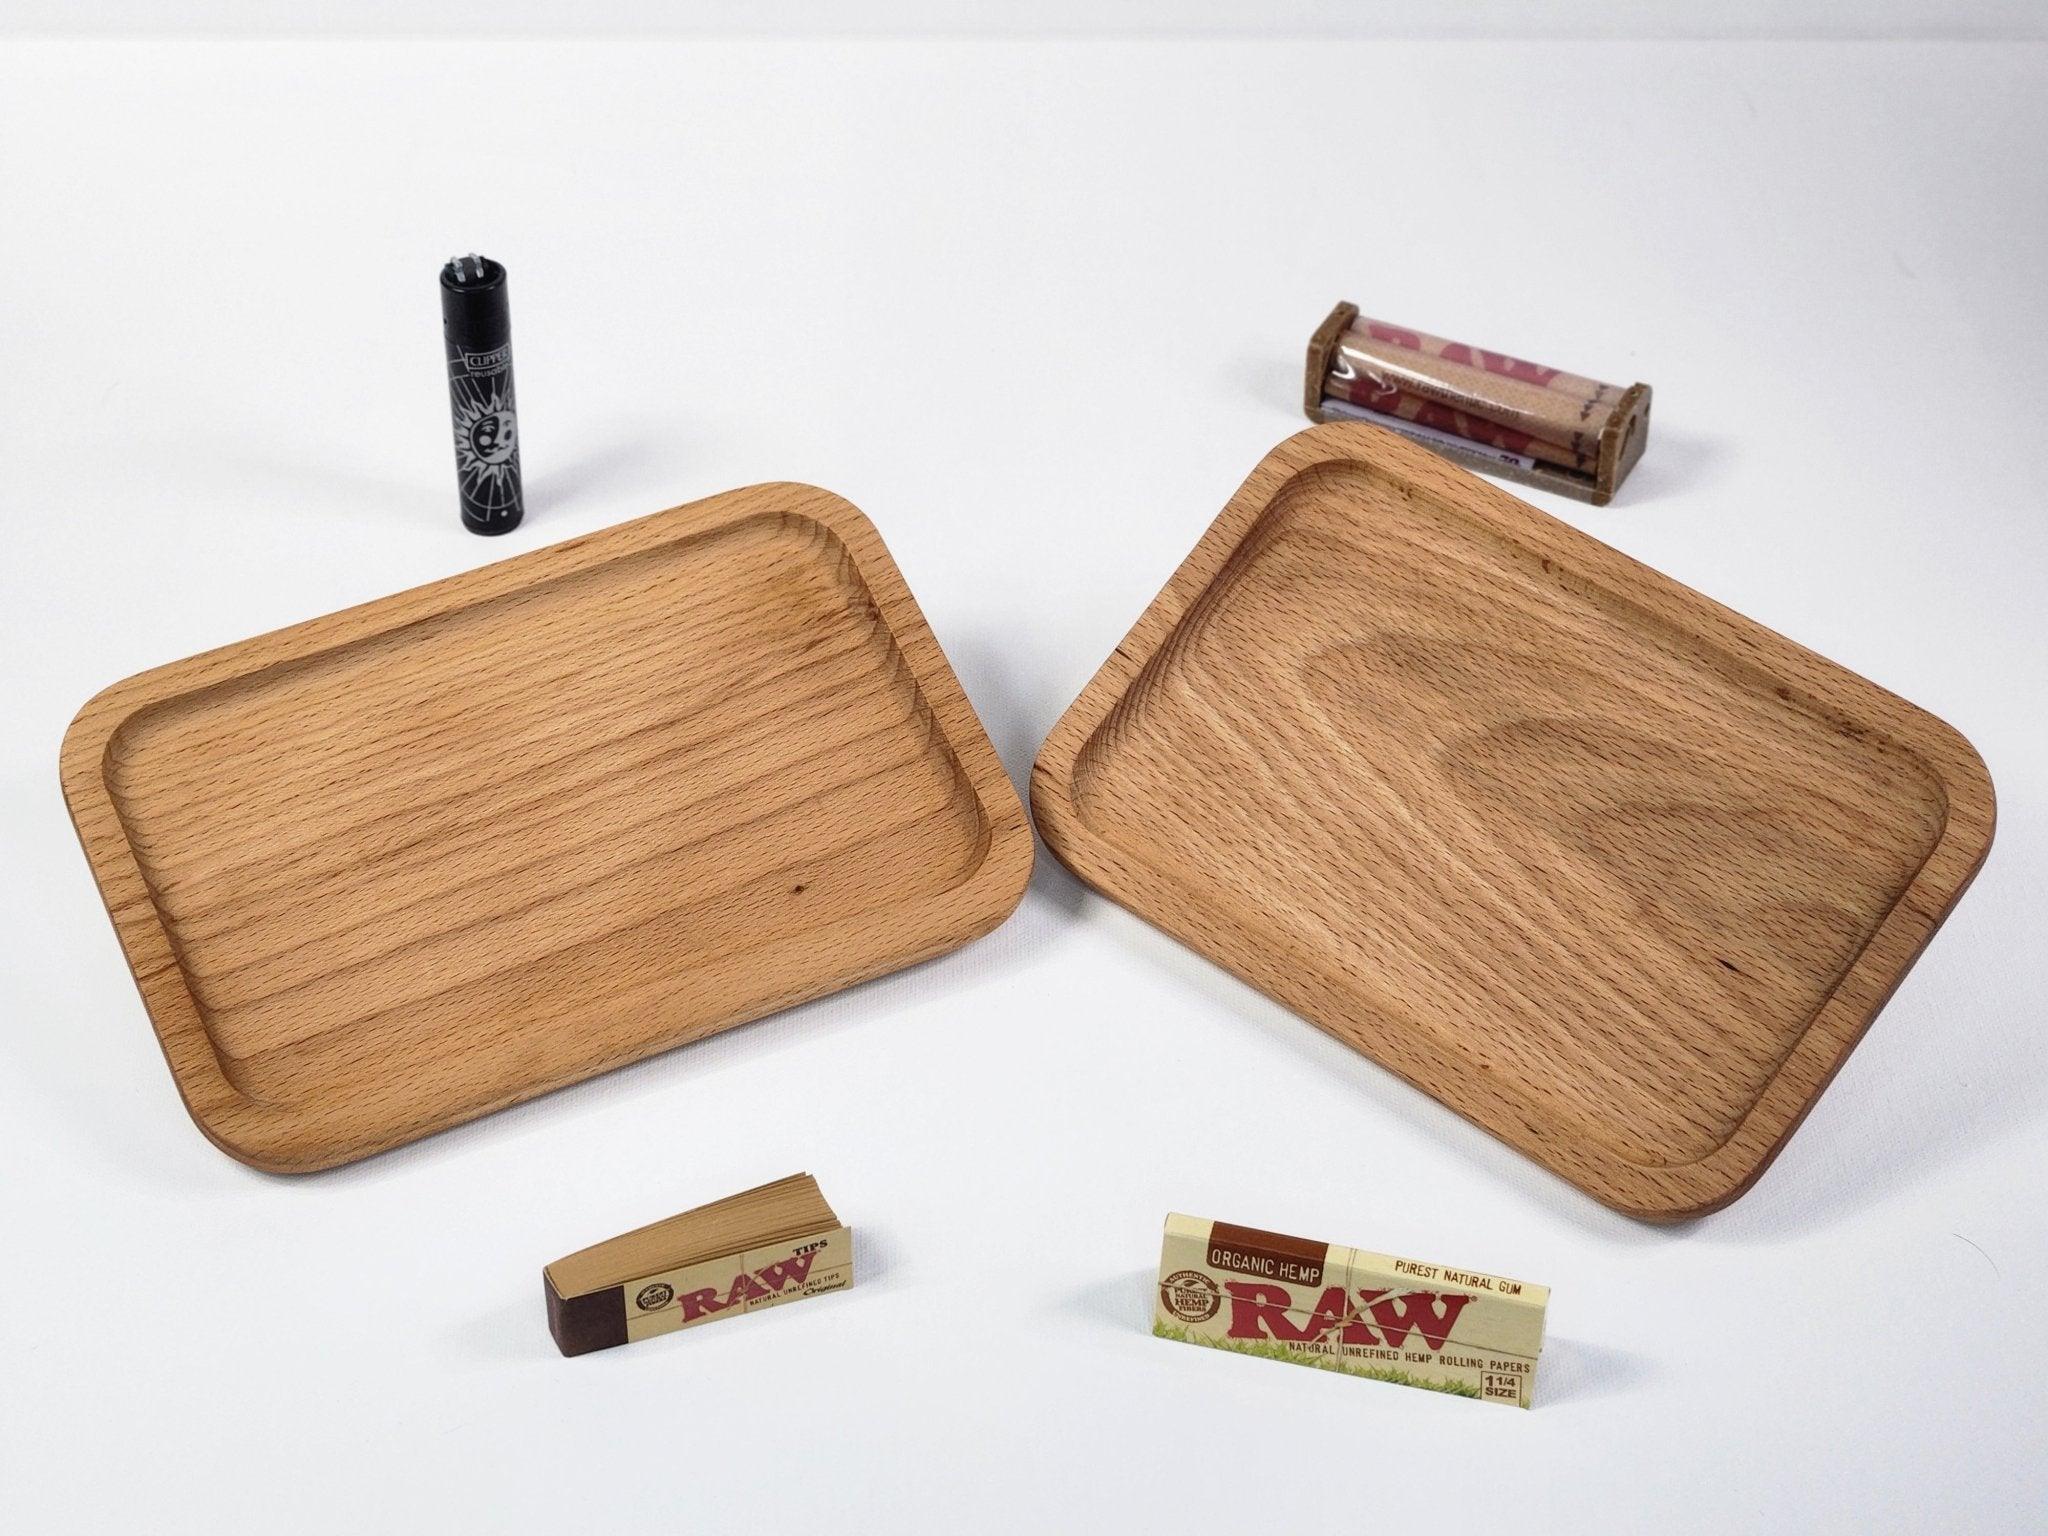 Sunflower/Weed Leaf Rolling Tray - The Bud Butler